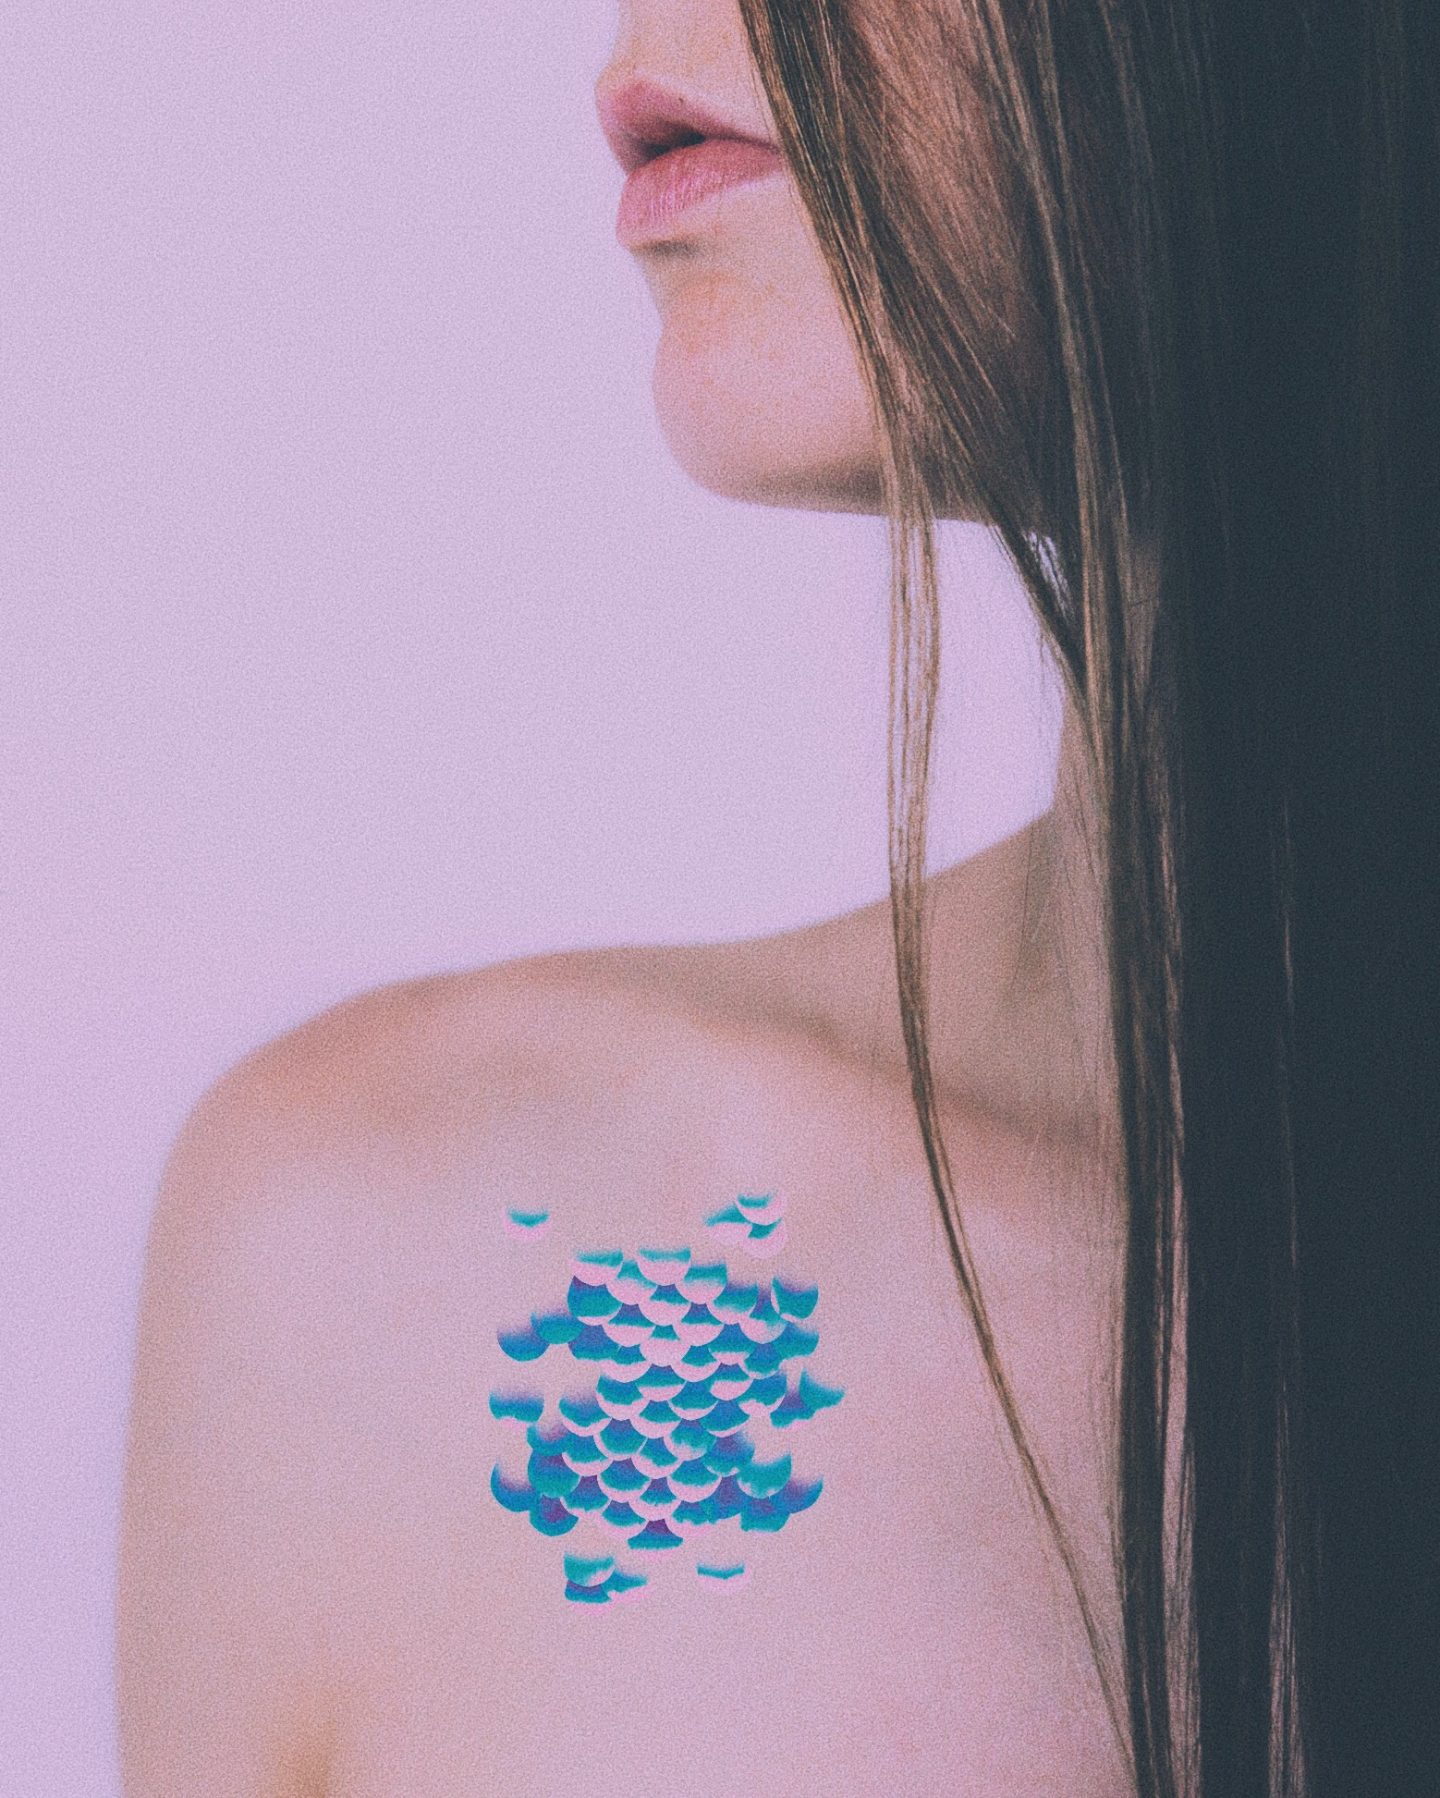 Woman with brown hair wearing mermaid scale temporary tattoos.